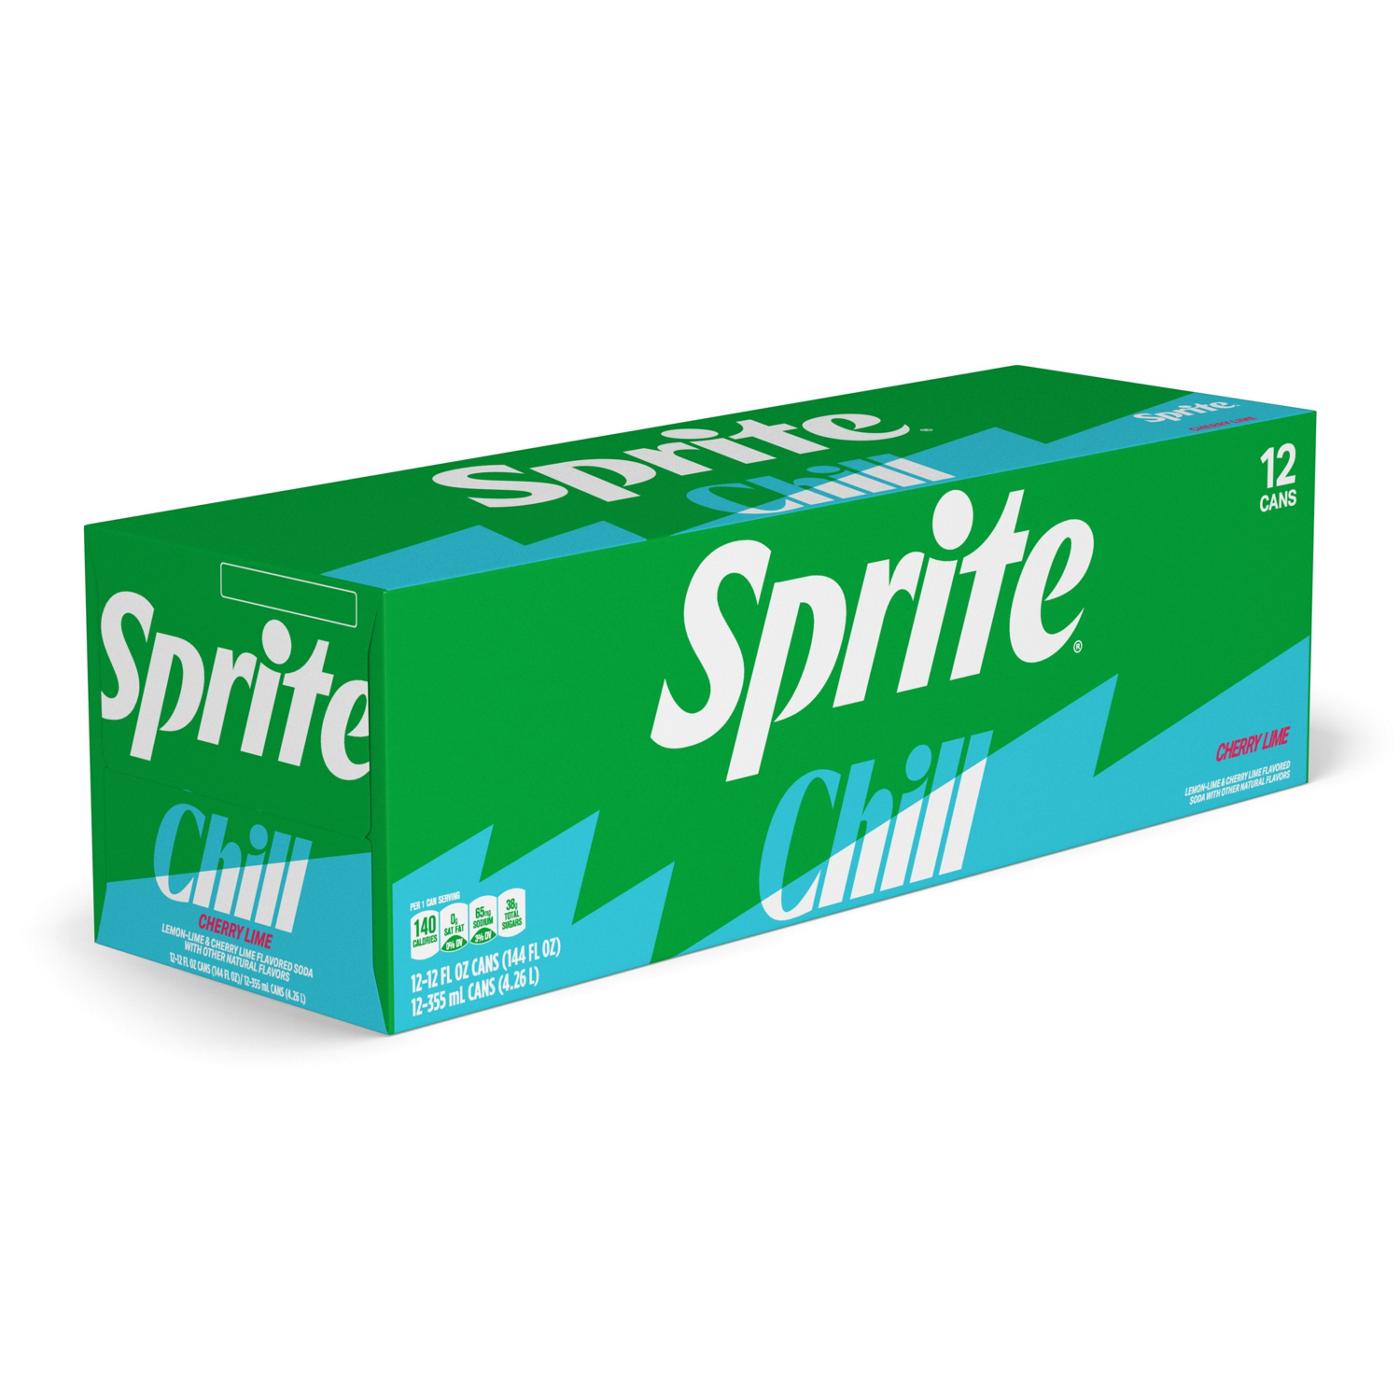 Sprite Chill Cherry Lime, 12 pk Cans; image 1 of 7